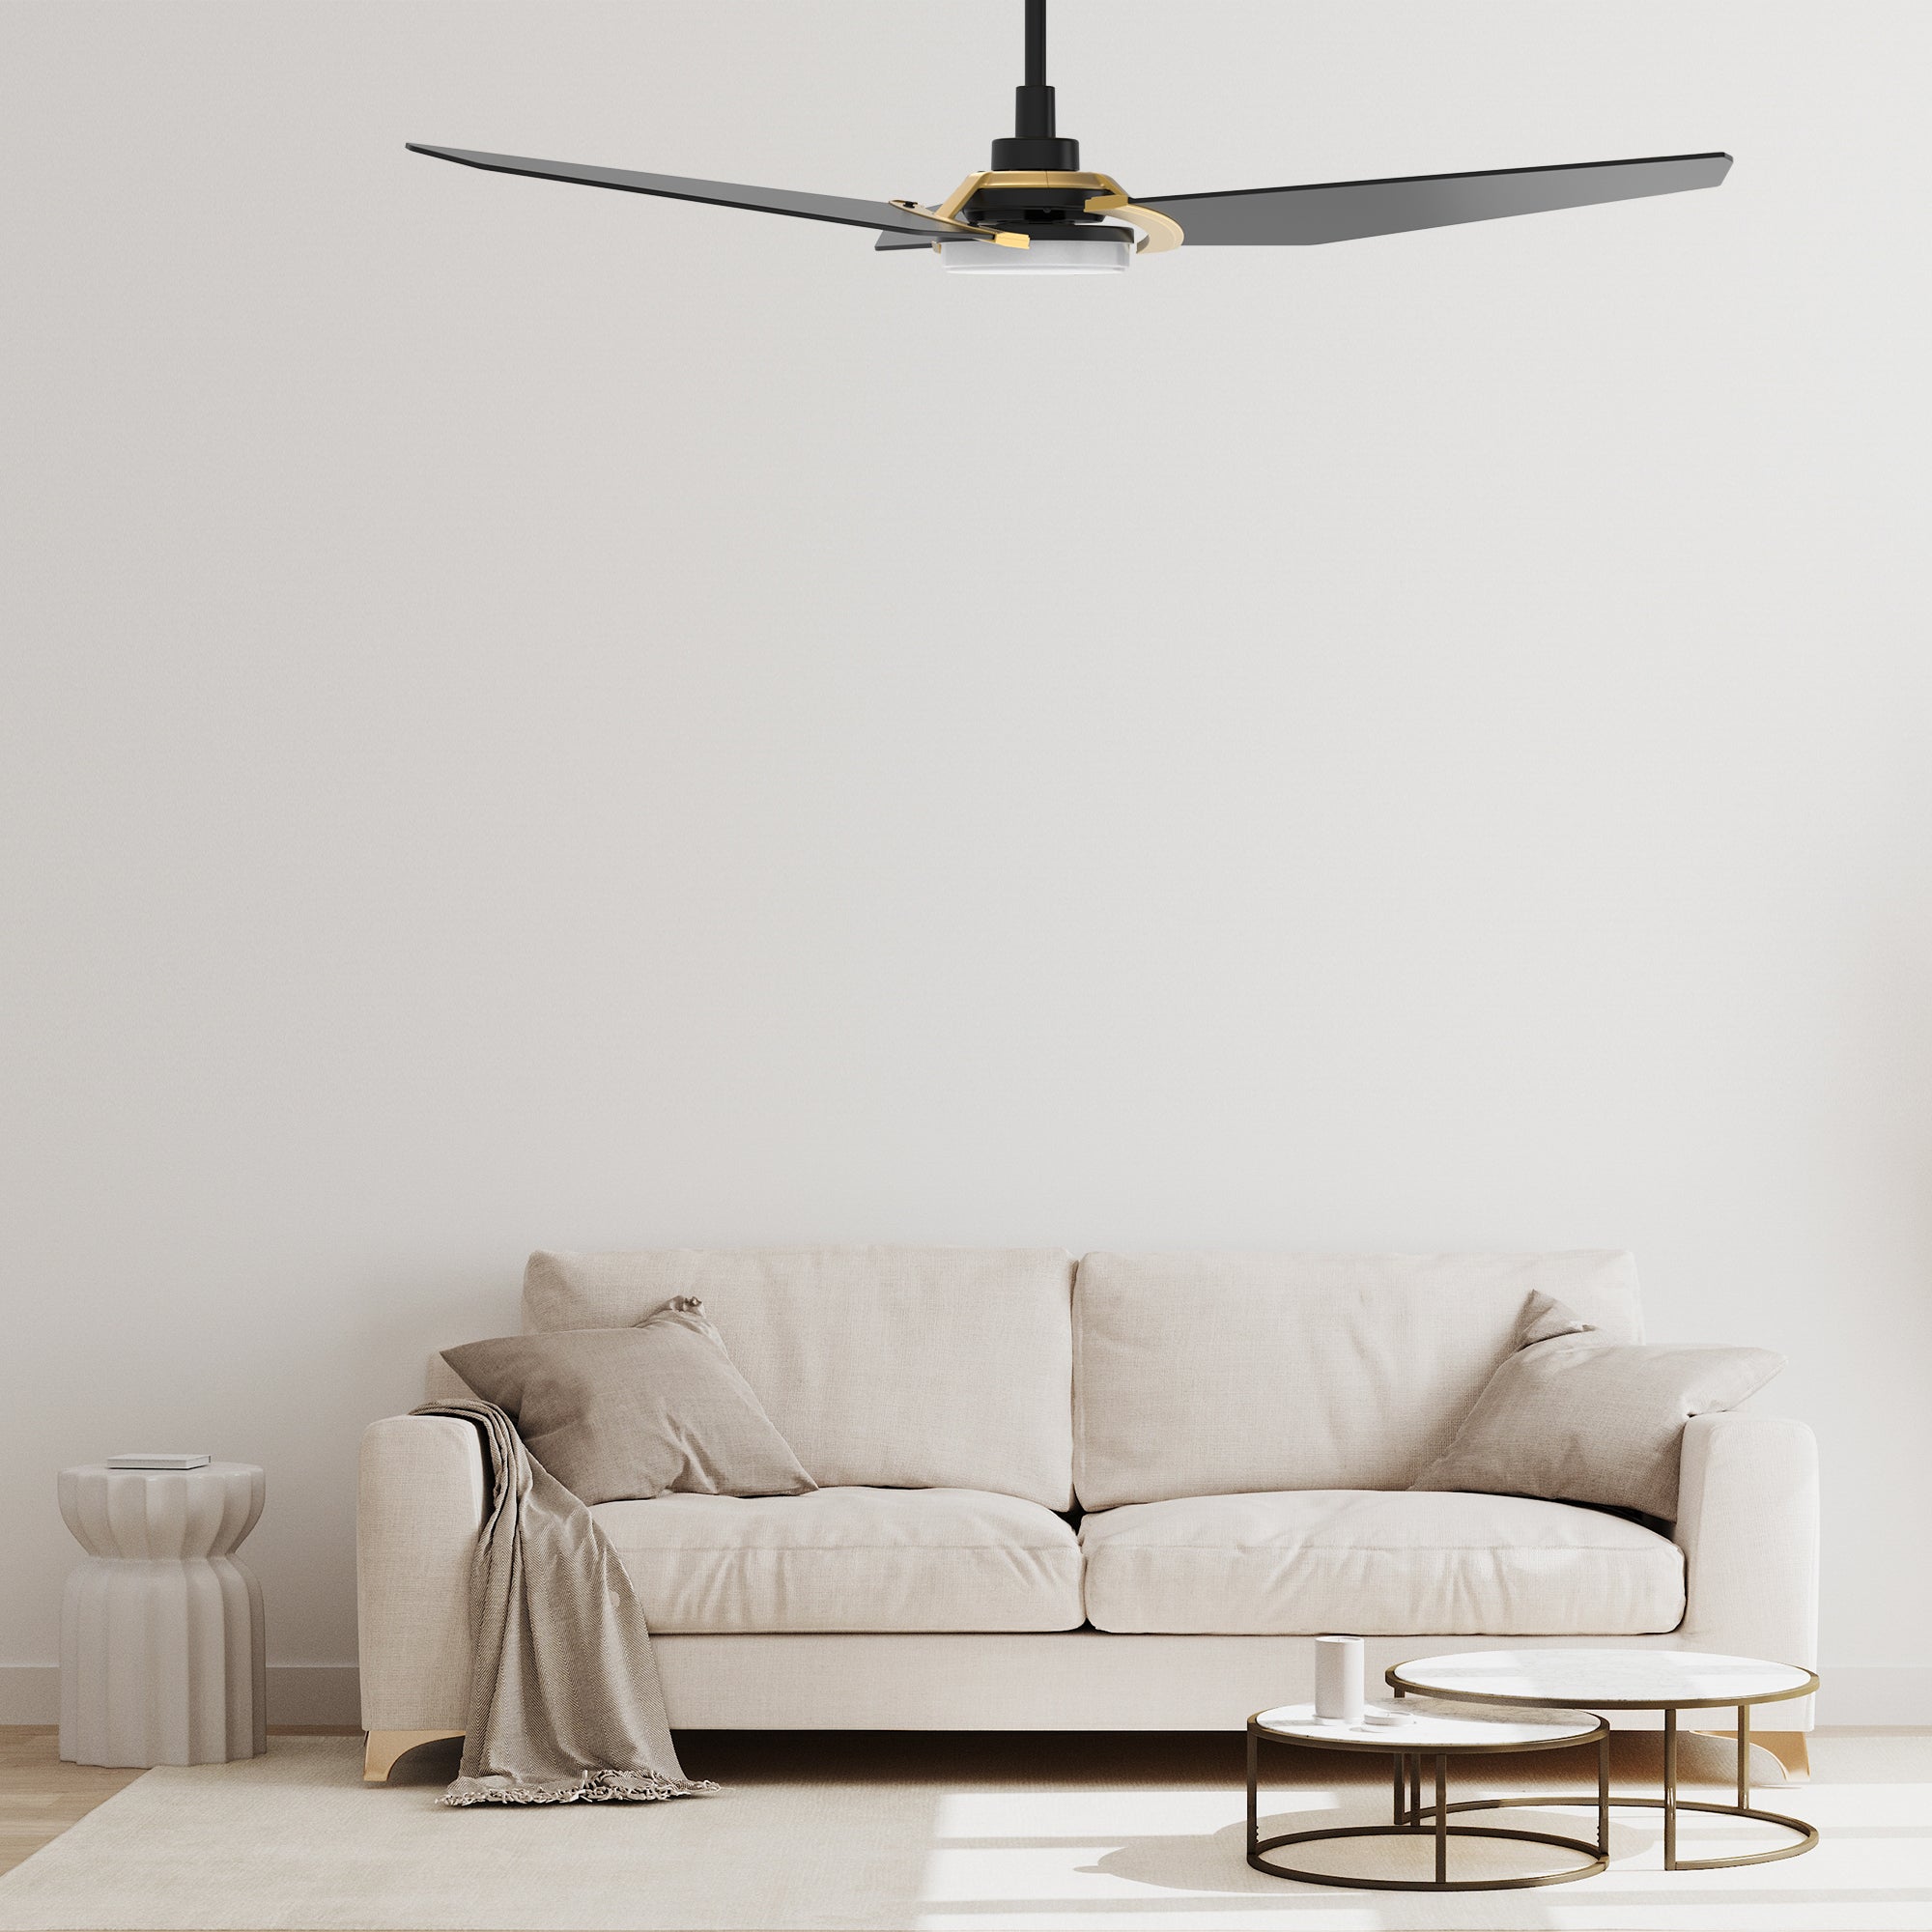 The Smafan Trailblazer 52&#39;&#39; Smart Fan’s sleek and stylish design fits perfectly with any décor trend. With a fully dimmable, and energy-efficient LED kit, whisper-quiet operation, compatible with Alexa, Google Assistant, Sir, phone app, easy install, Trailblazer helps you have a smarter way to stay cool.